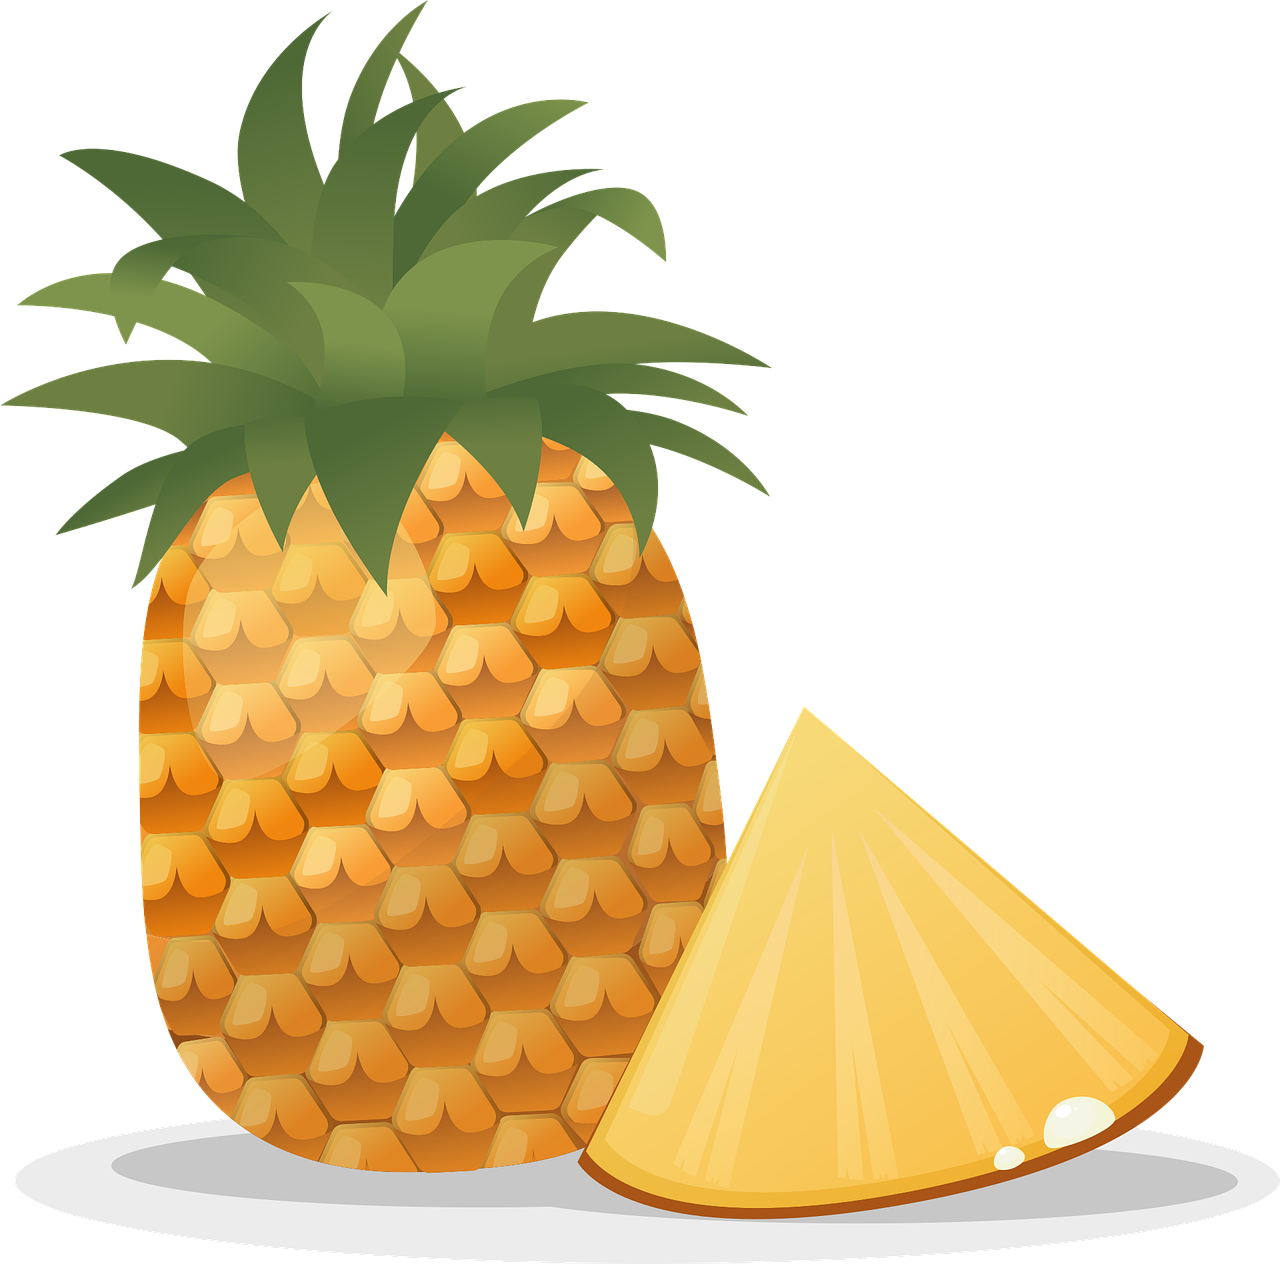 a pineapple next to a slice of pineapple, an illustration of, inspired by Masamitsu Ōta, pixabay, game icon asset, sharp high detail illustration, served on a plate, cartoon style illustration